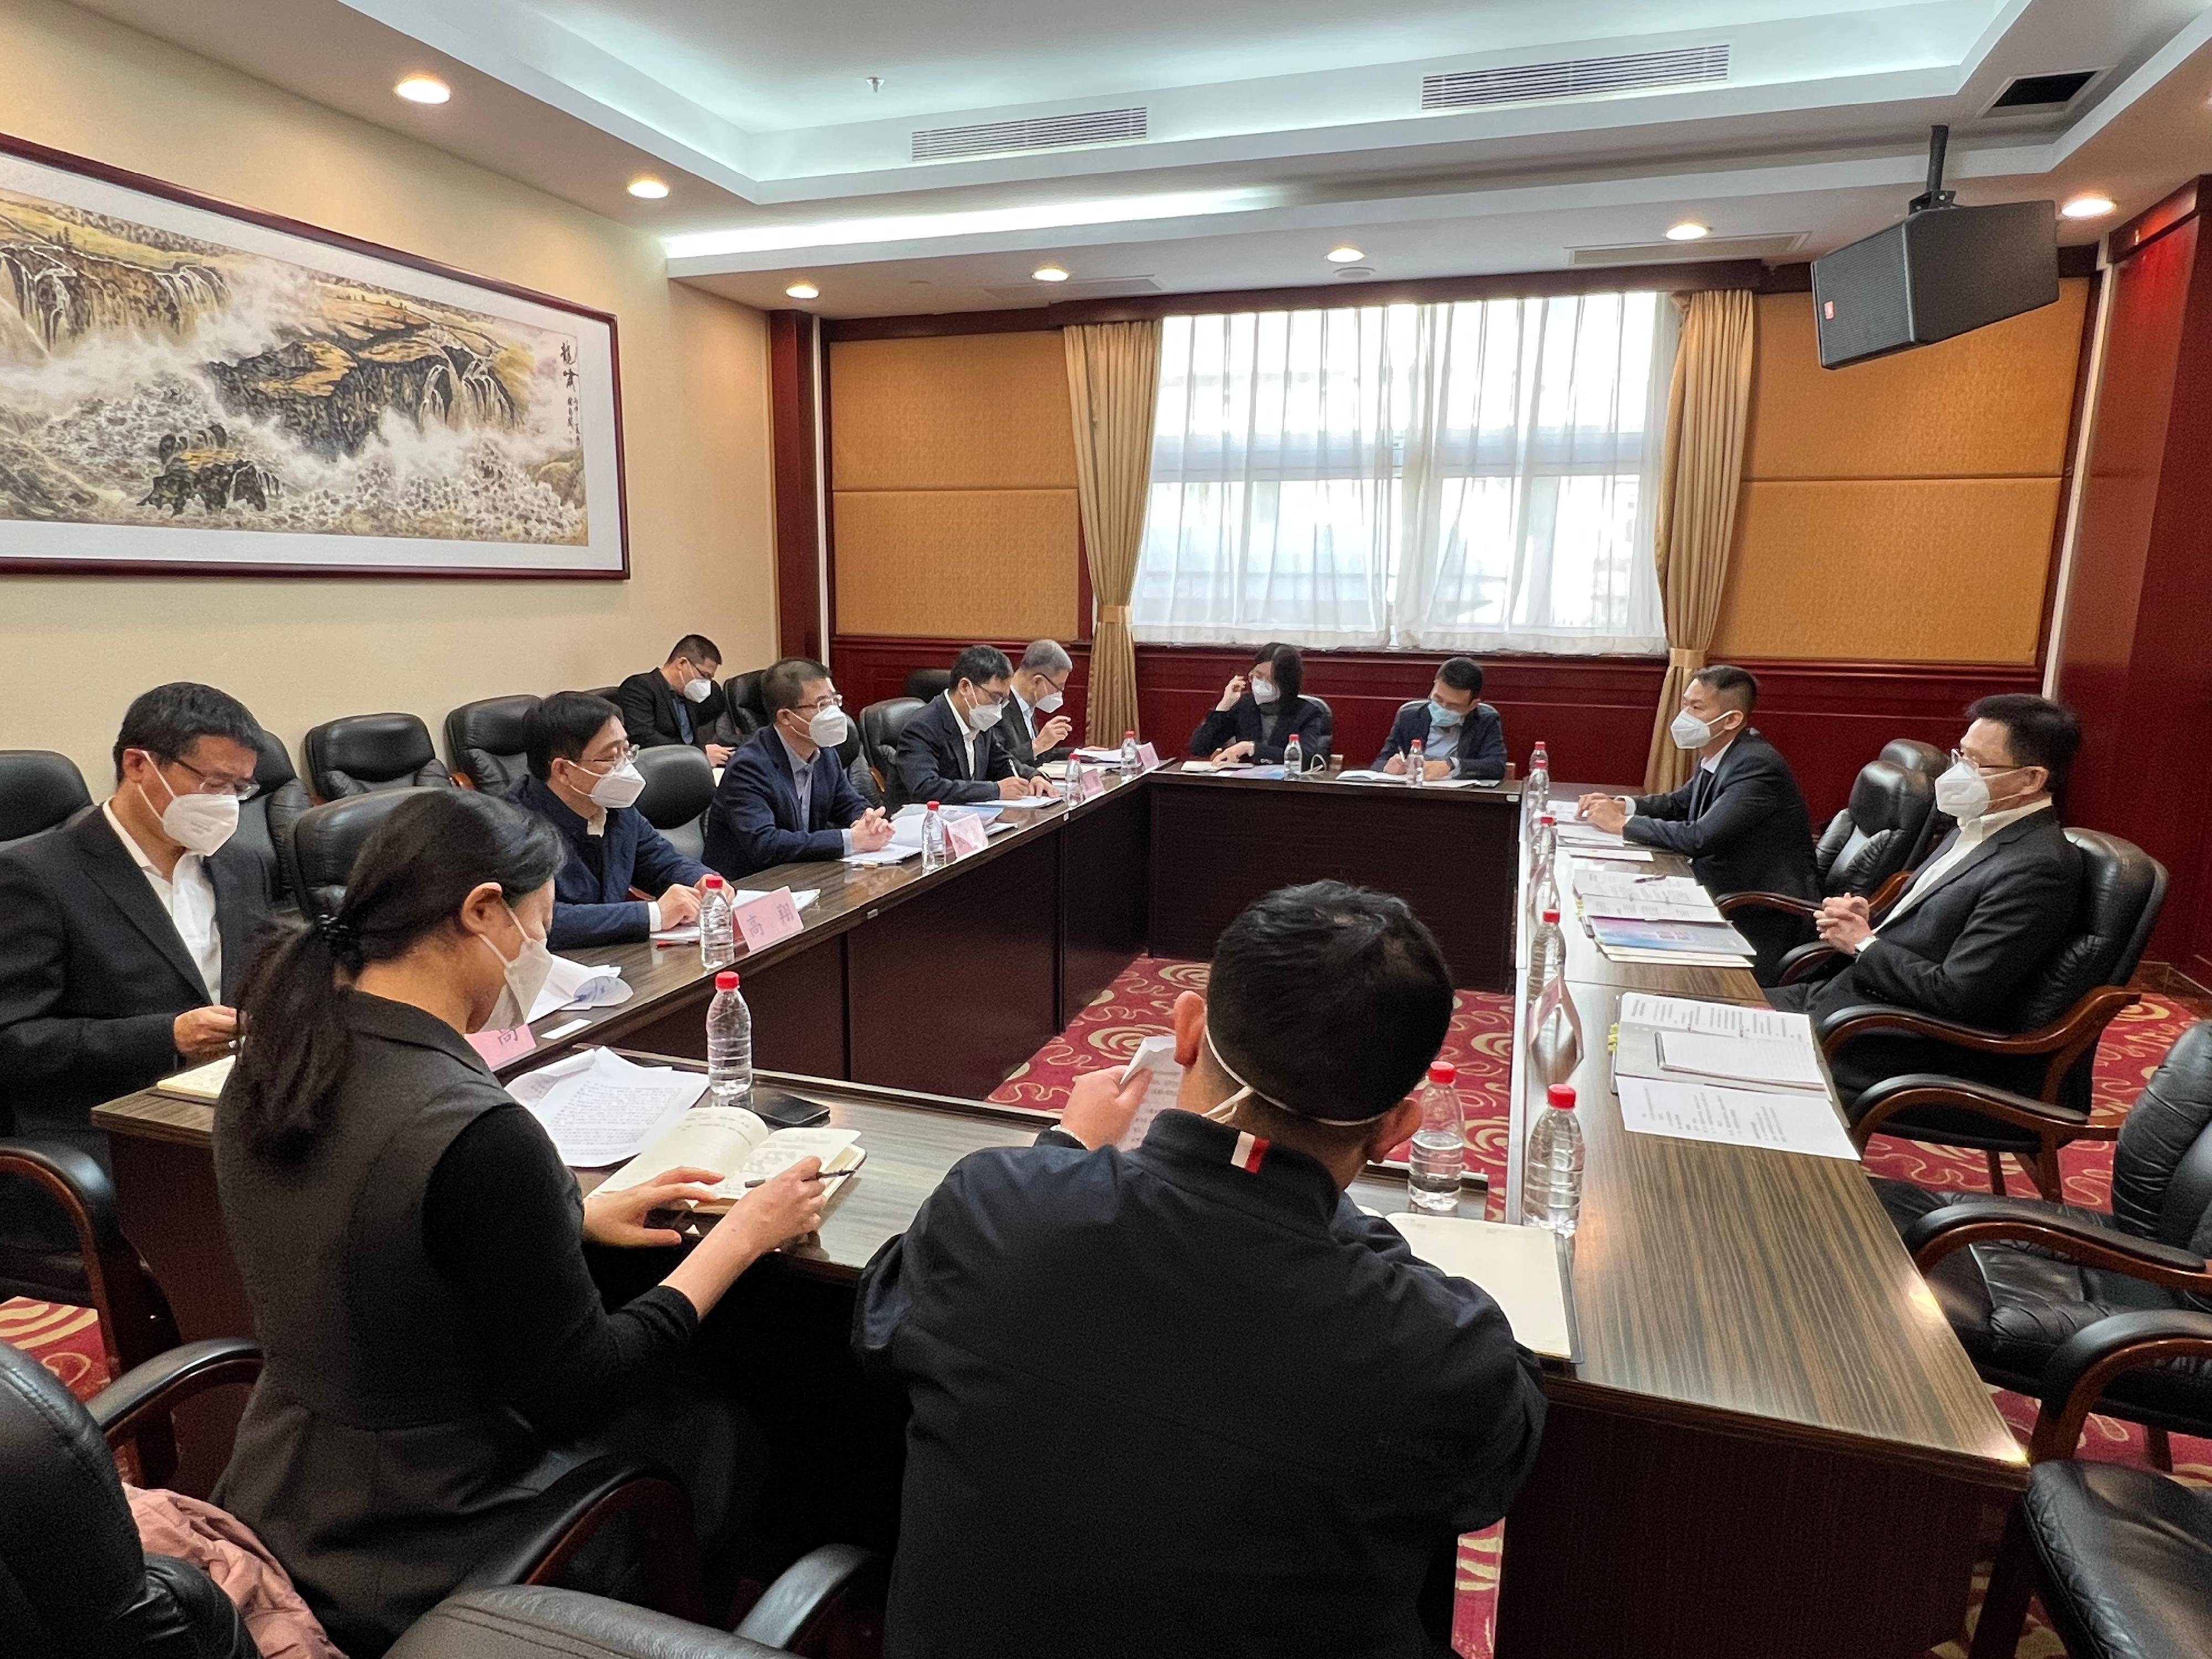 The Secretary for Innovation, Technology and Industry, Professor Sun Dong (first right), visits the Ministry of Science and Technology in Beijing today (January 17) and briefs Vice Minister of Science and Technology Professor Zhang Guangjun (third left) on the key elements in the Hong Kong Innovation and Technology Development Blueprint.